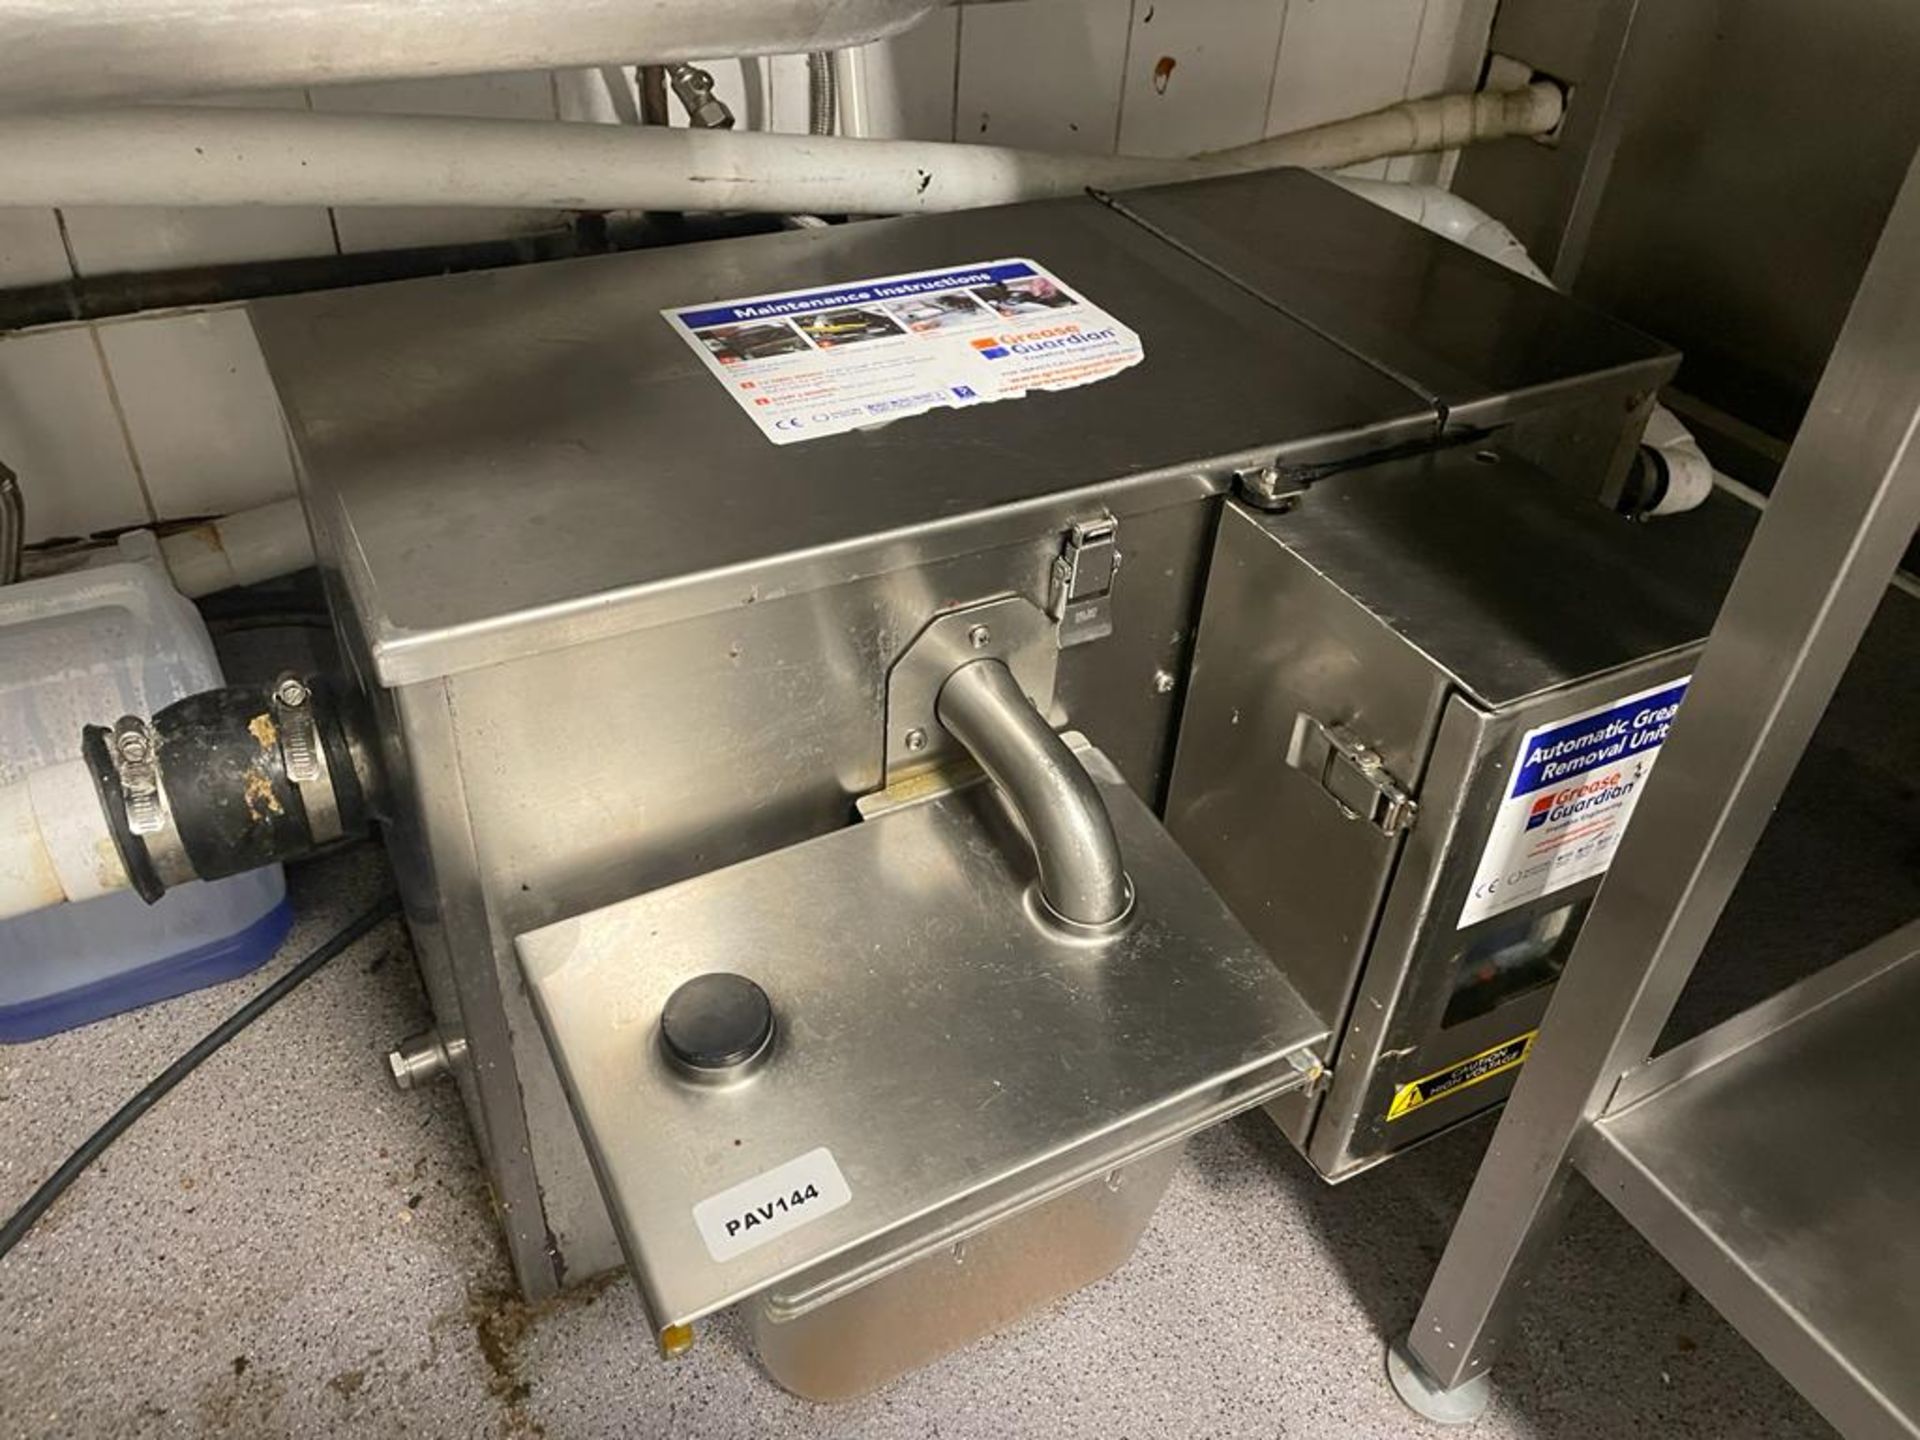 1 x Grease Guardian Grease Trap For Passthrough Dishwashers - Ref: PAV144 - Image 2 of 3